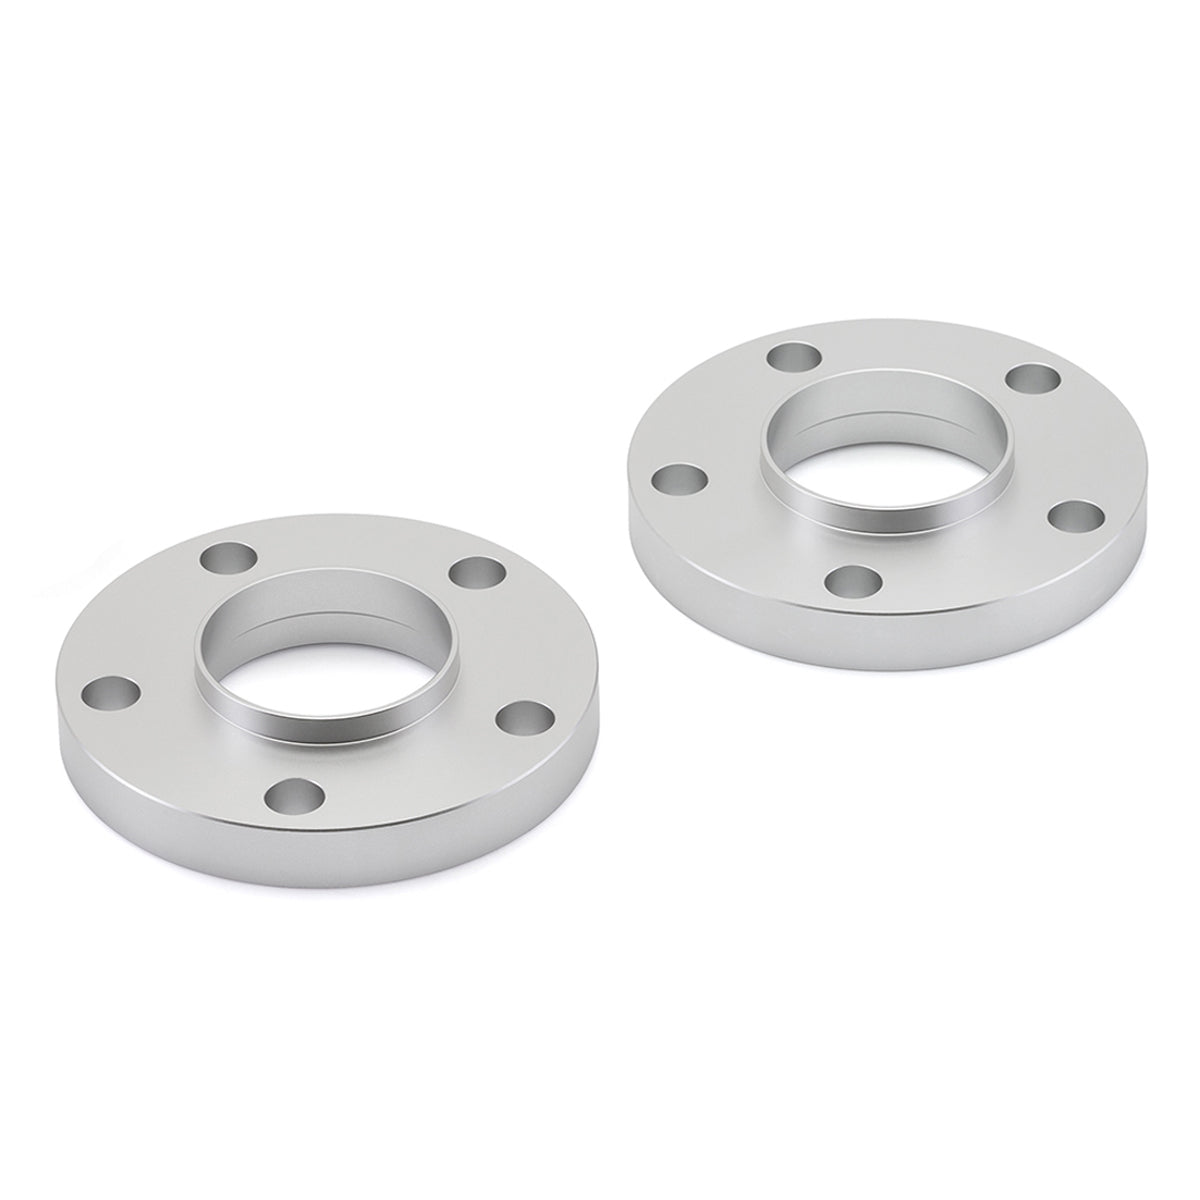 2008-2015 BMW 7 Series F01 F02 5x120 Hubcentric Wheelcentric Wheel Spacers set of 2